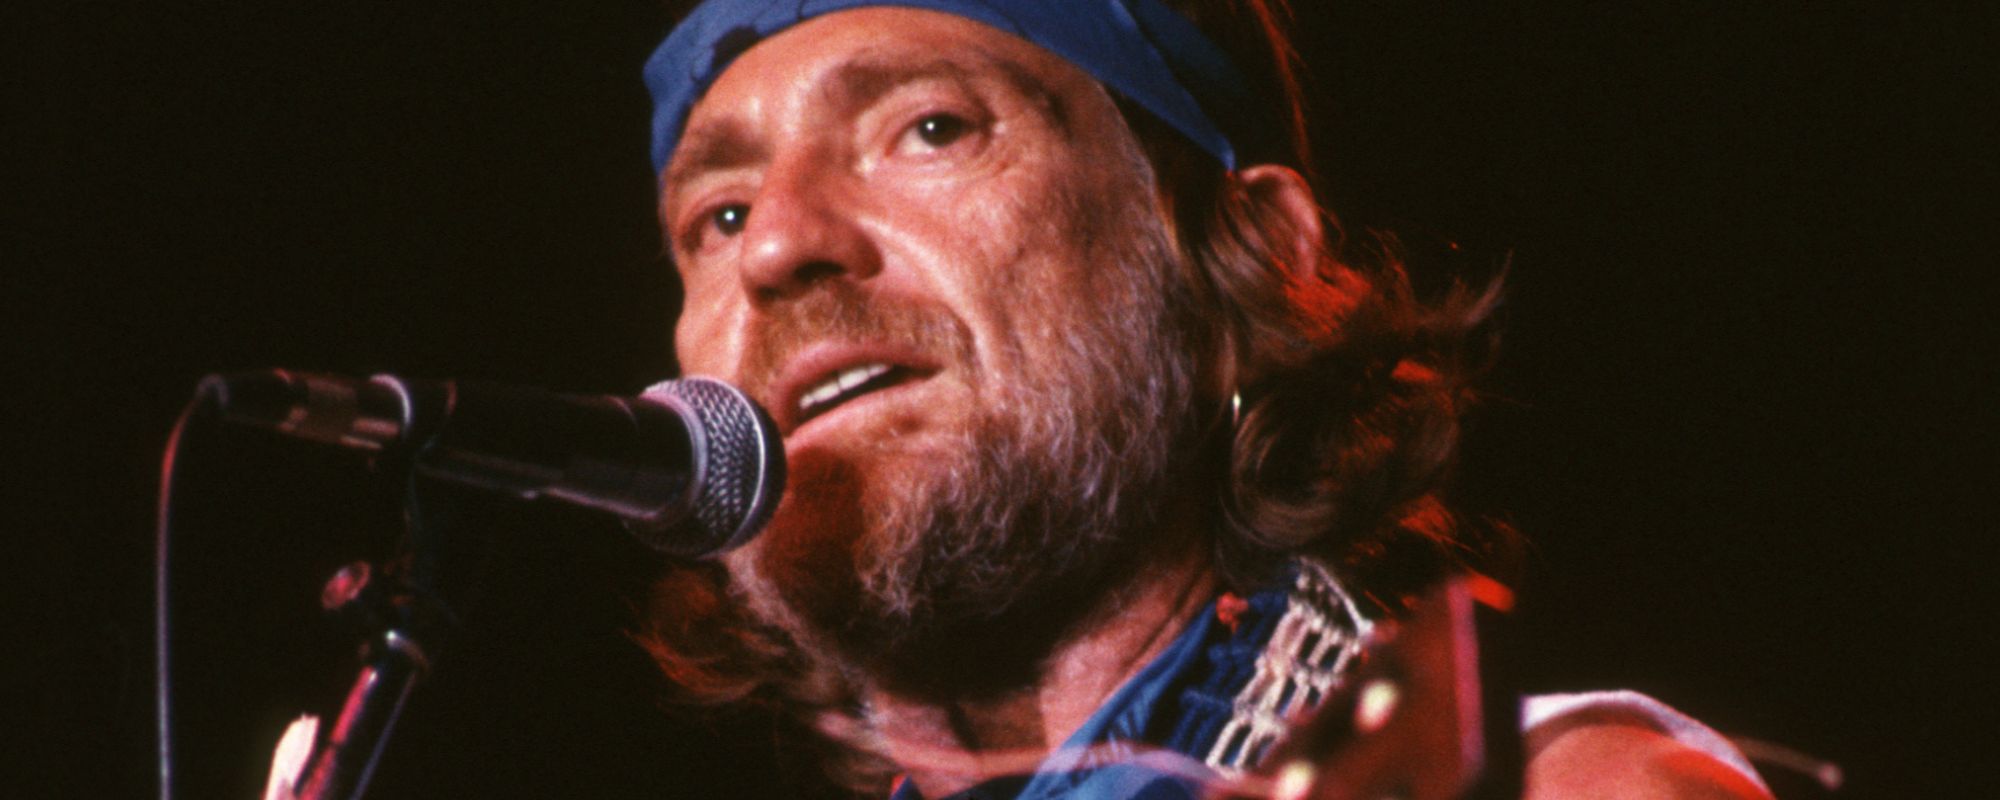 The Artist Willie Nelson Heralded as “The Greatest” Musician